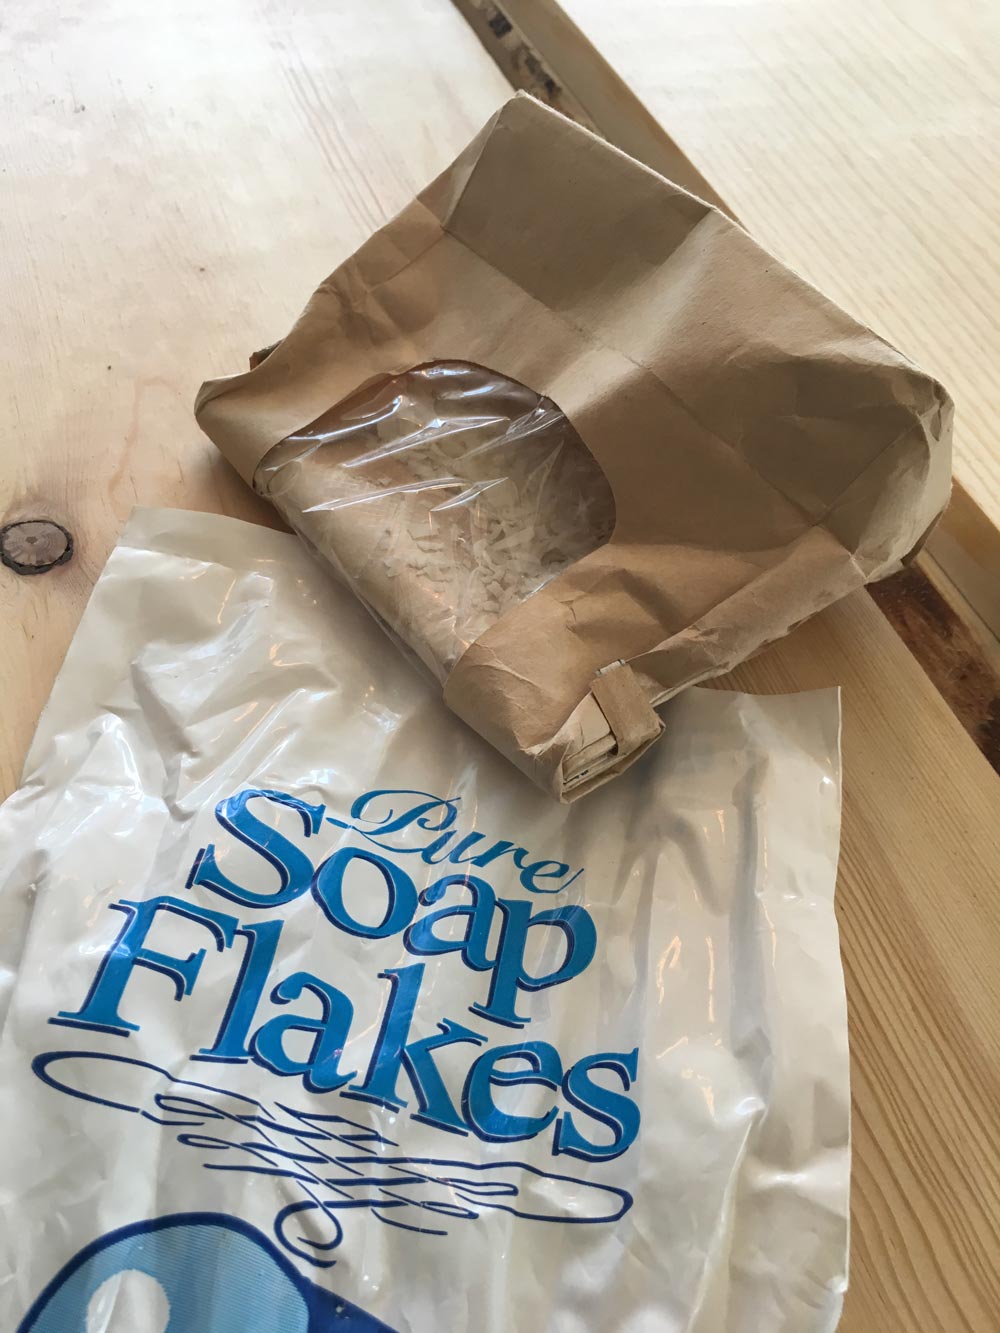 Can Soap Flakes Go Bad?